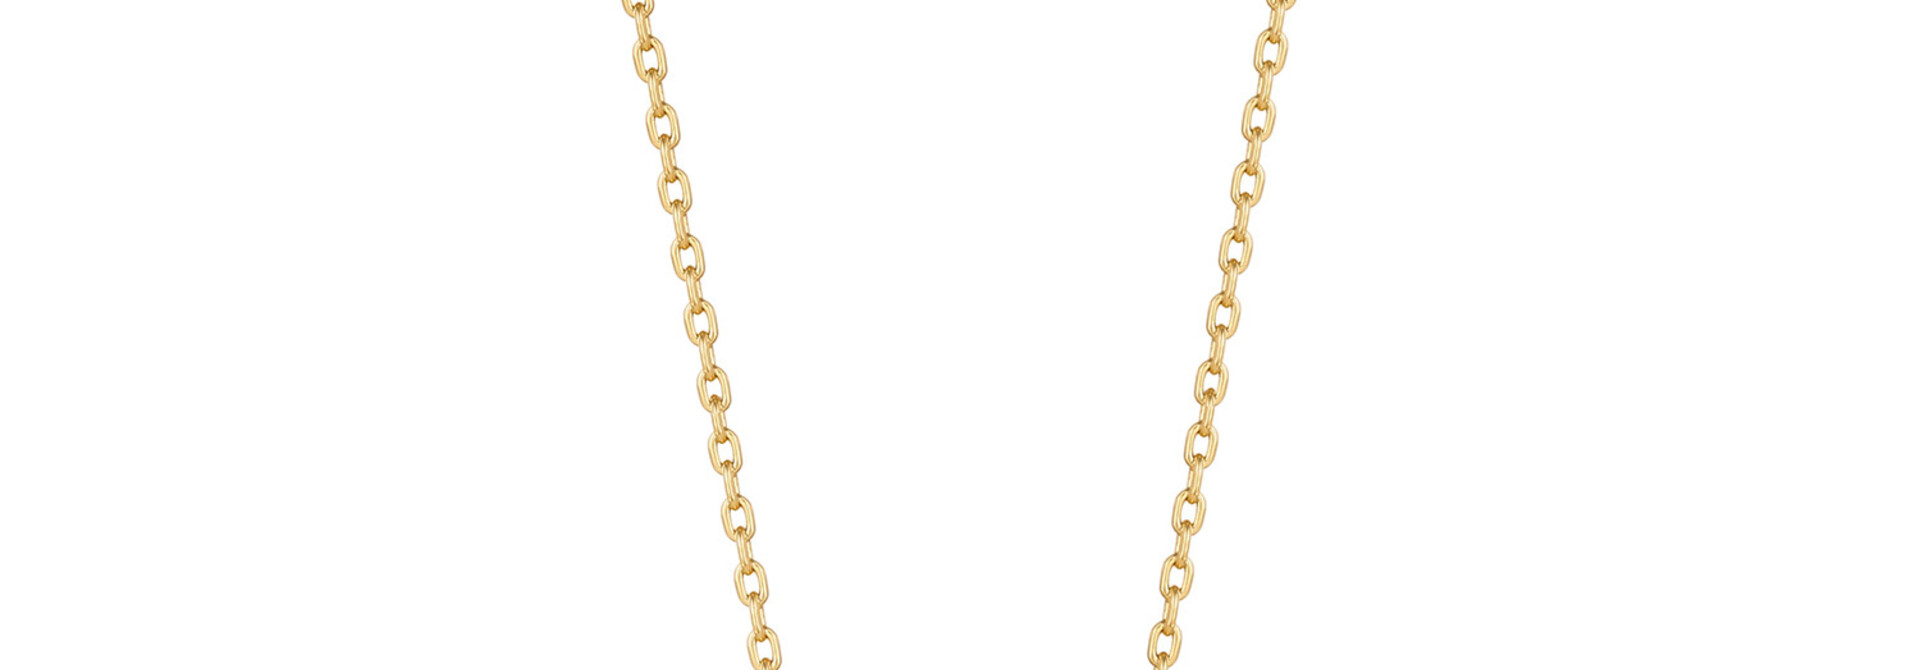 Sparkle Emblem Chain Ketting - Gold plated